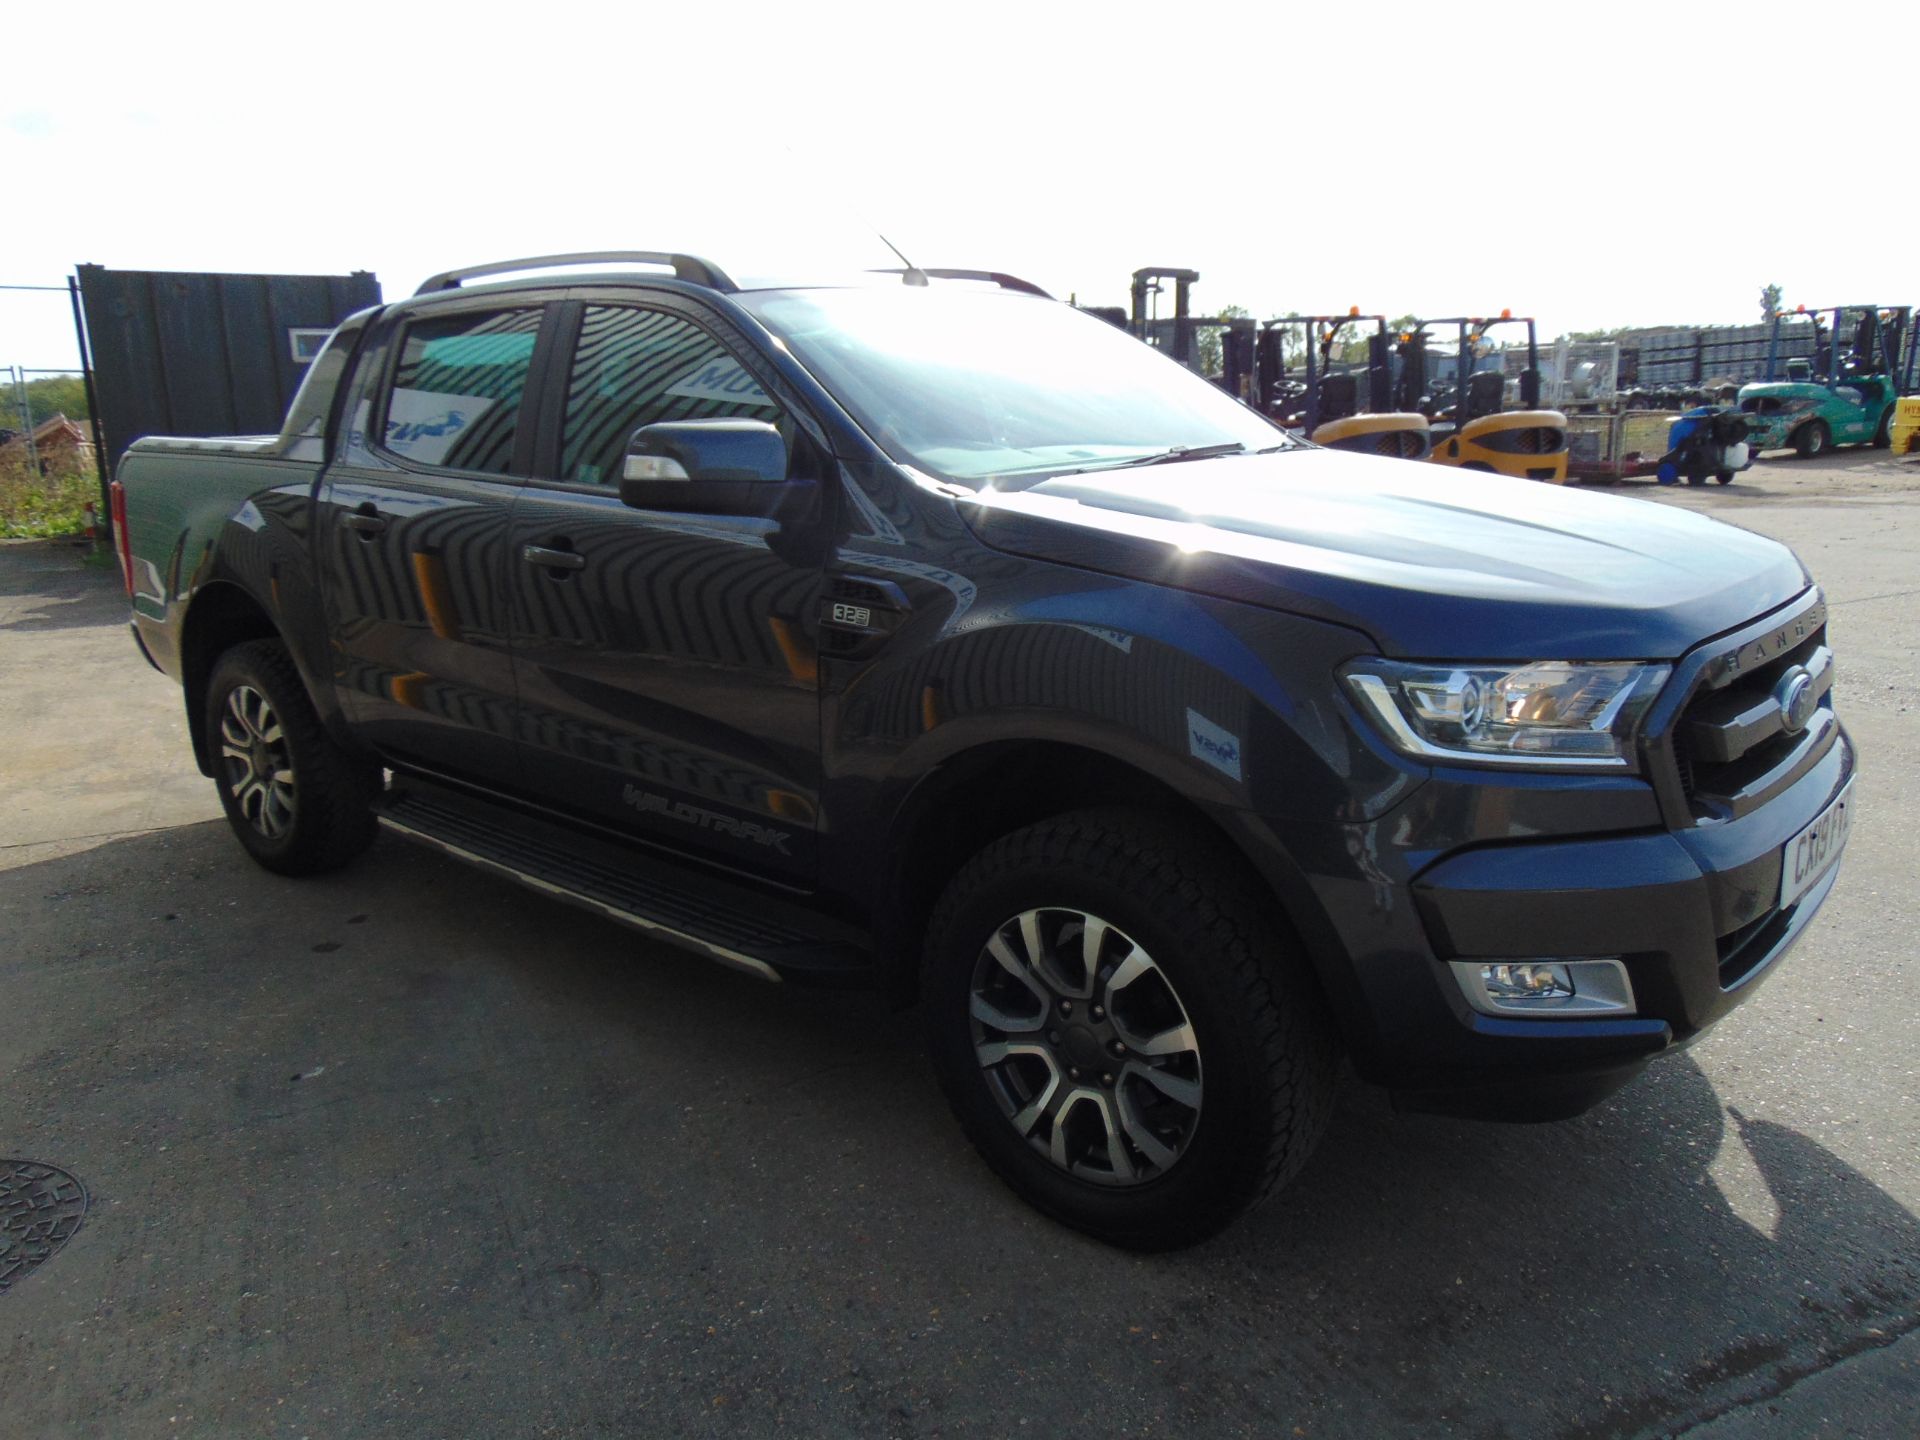 2019 Ford Ranger Wildtrak Double Cab 4x4 3.2 6 Speed Auto ONLY 45,667 Miles Warranted - Image 5 of 45